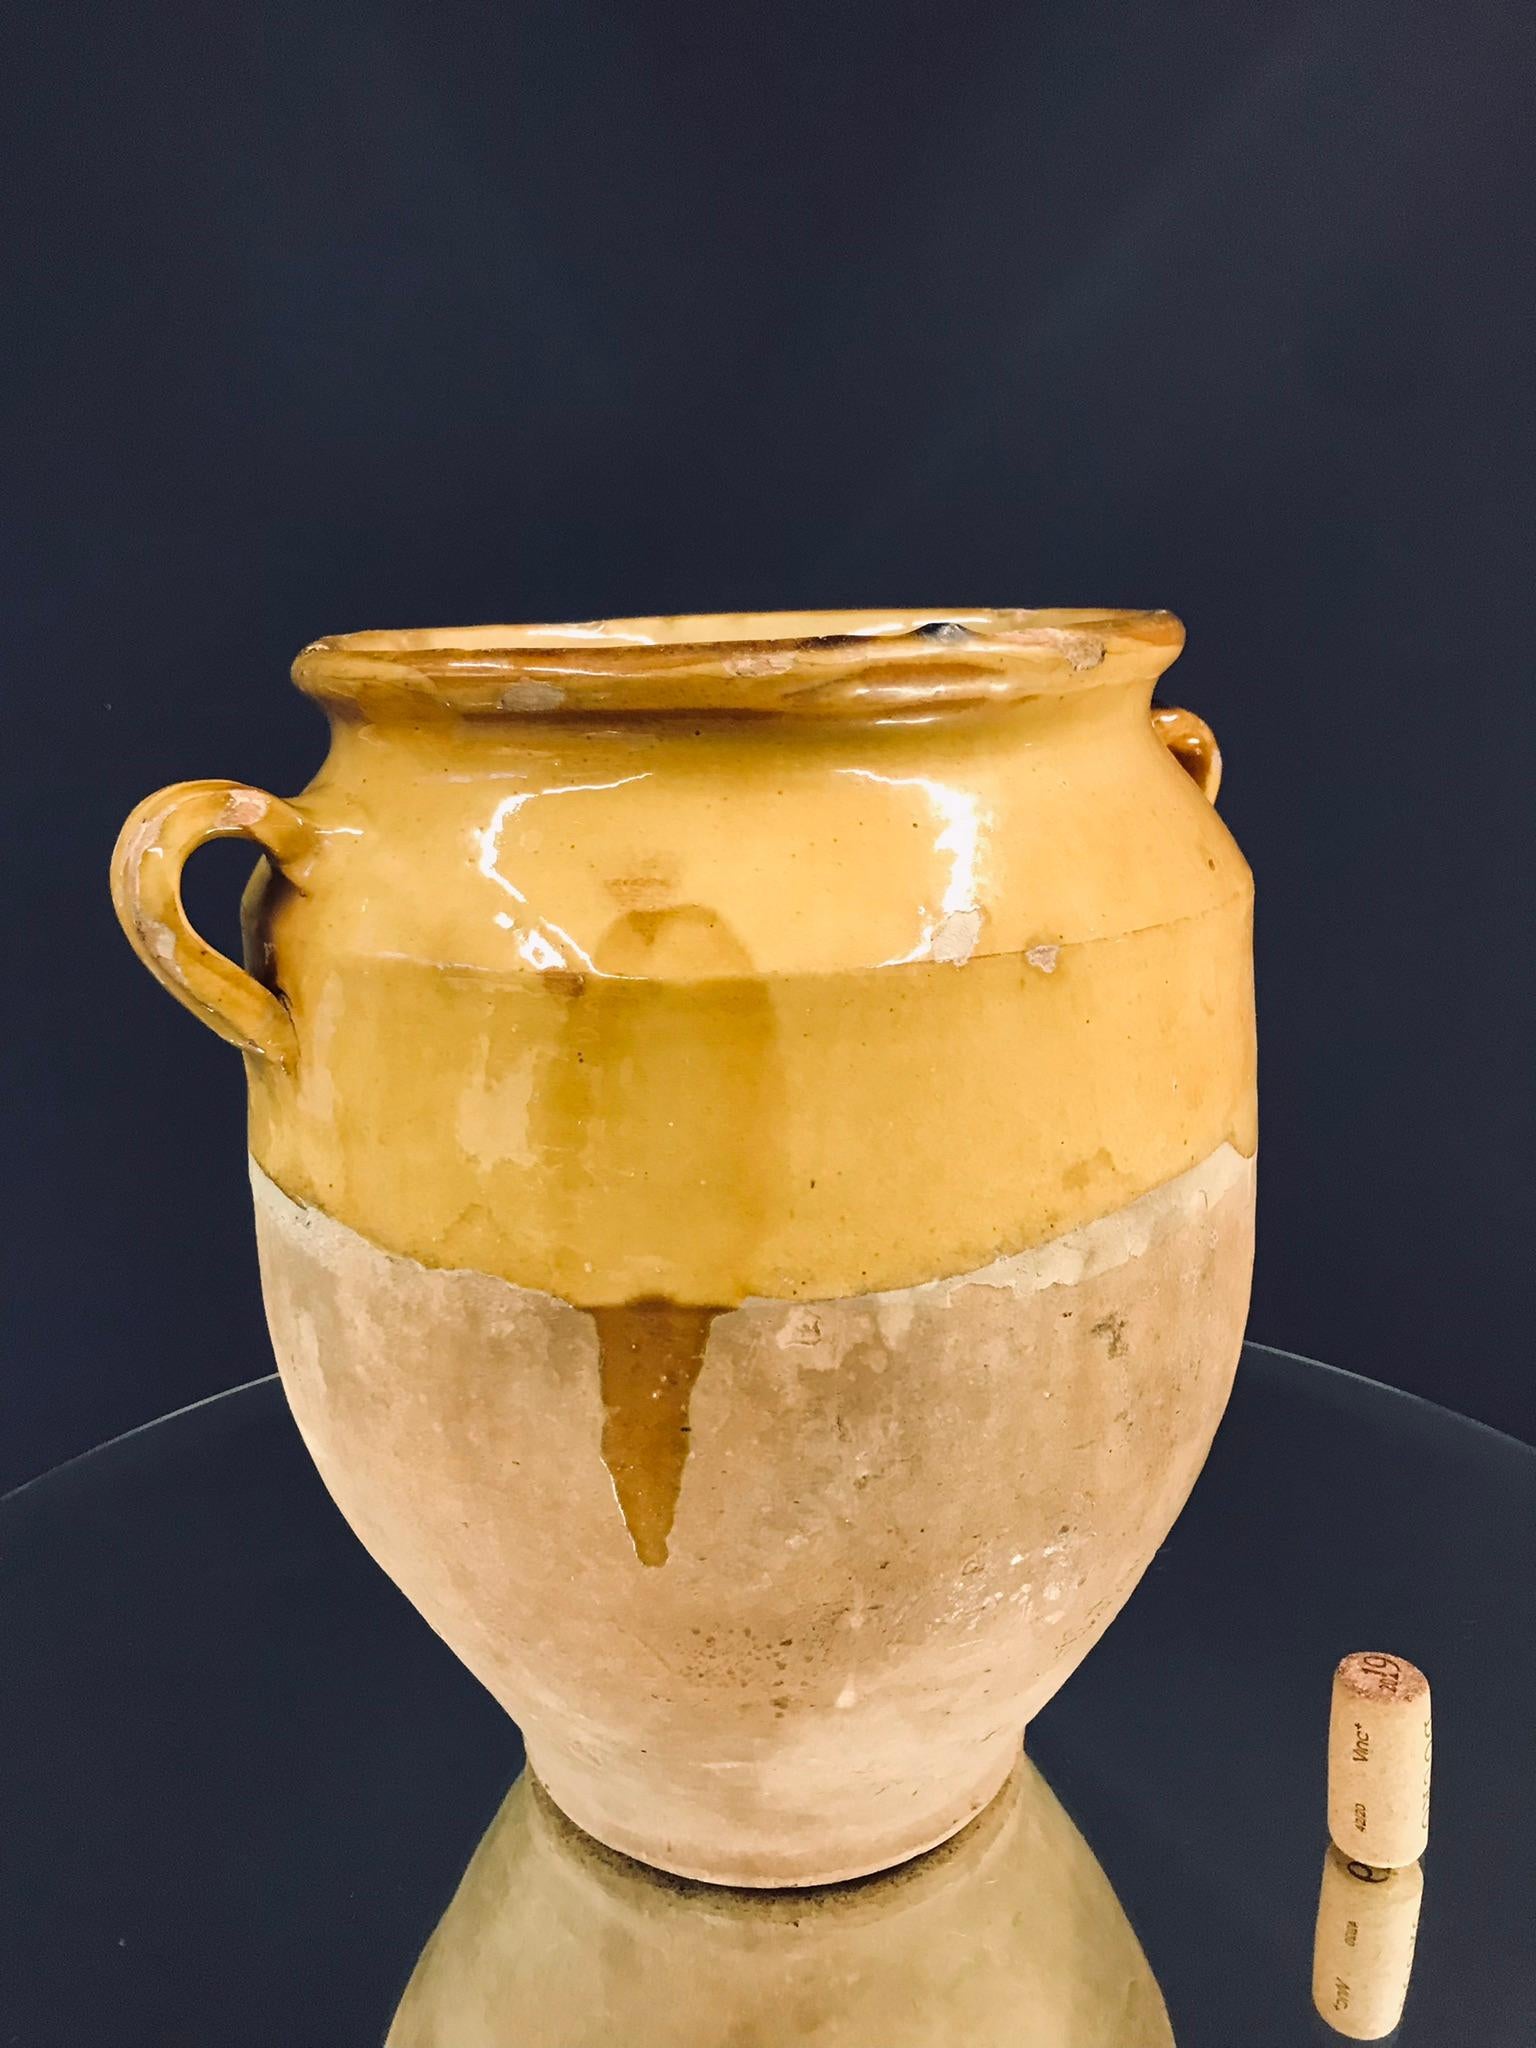 Small 19th Century Yellow Glazed French Ceramic Confit Jar #3 In Good Condition For Sale In Munich, DE